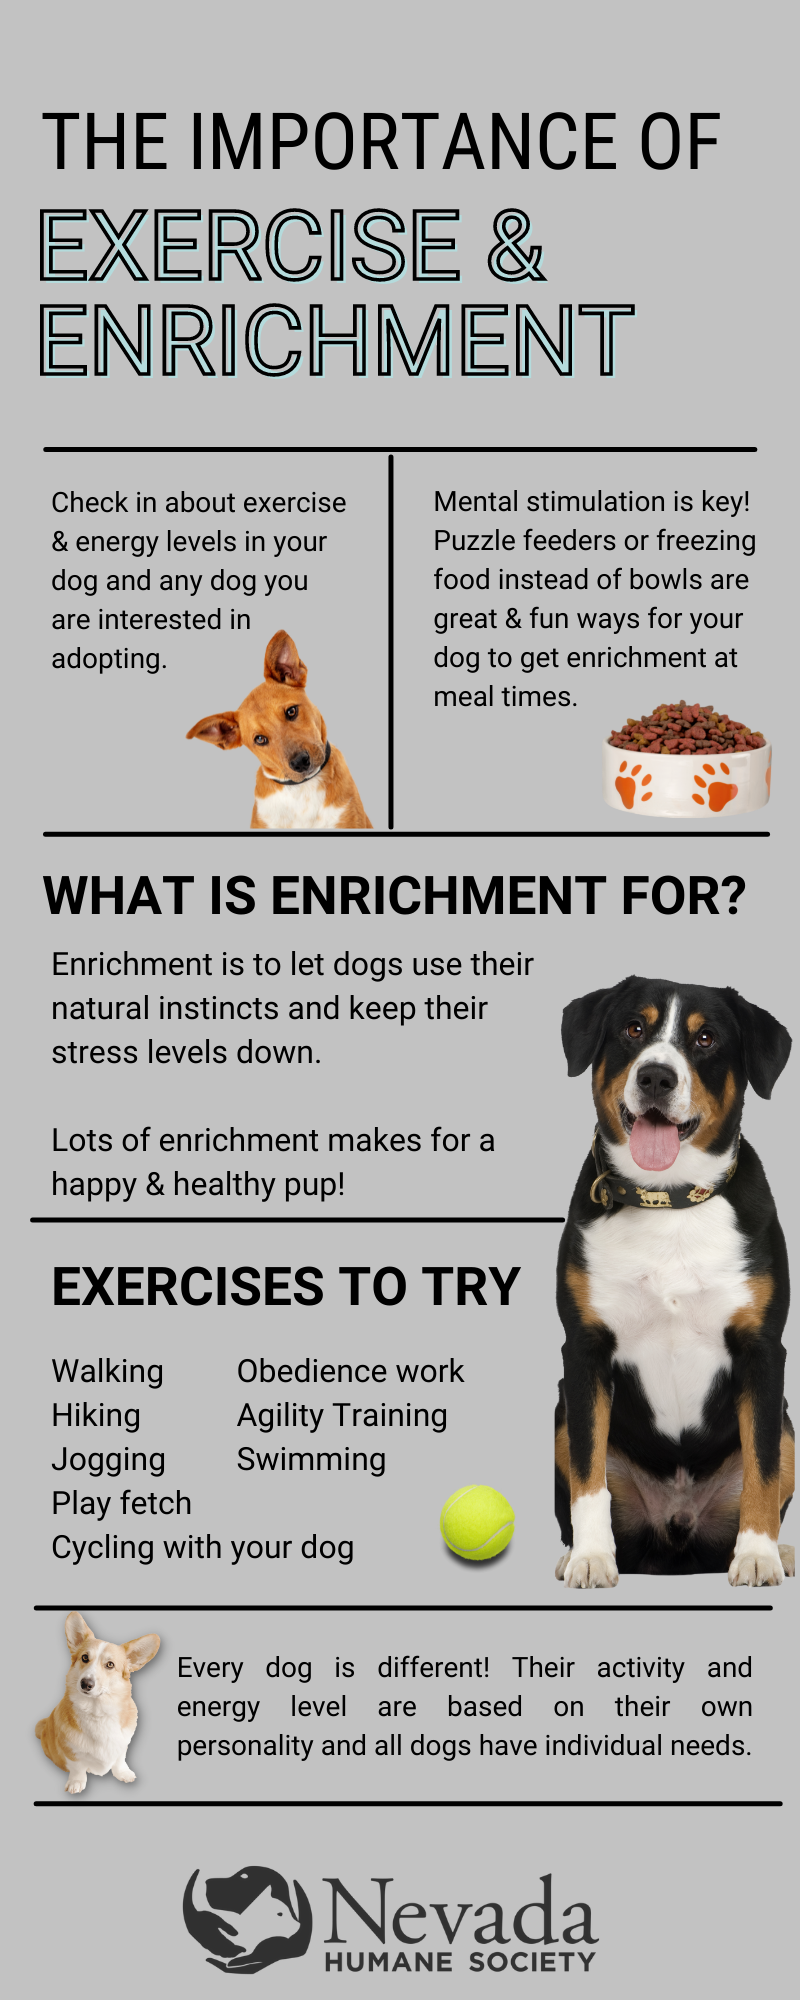 https://nevadahumanesociety.org/wp-content/uploads/2022/05/Enrichment-and-exercise-Infographic.png